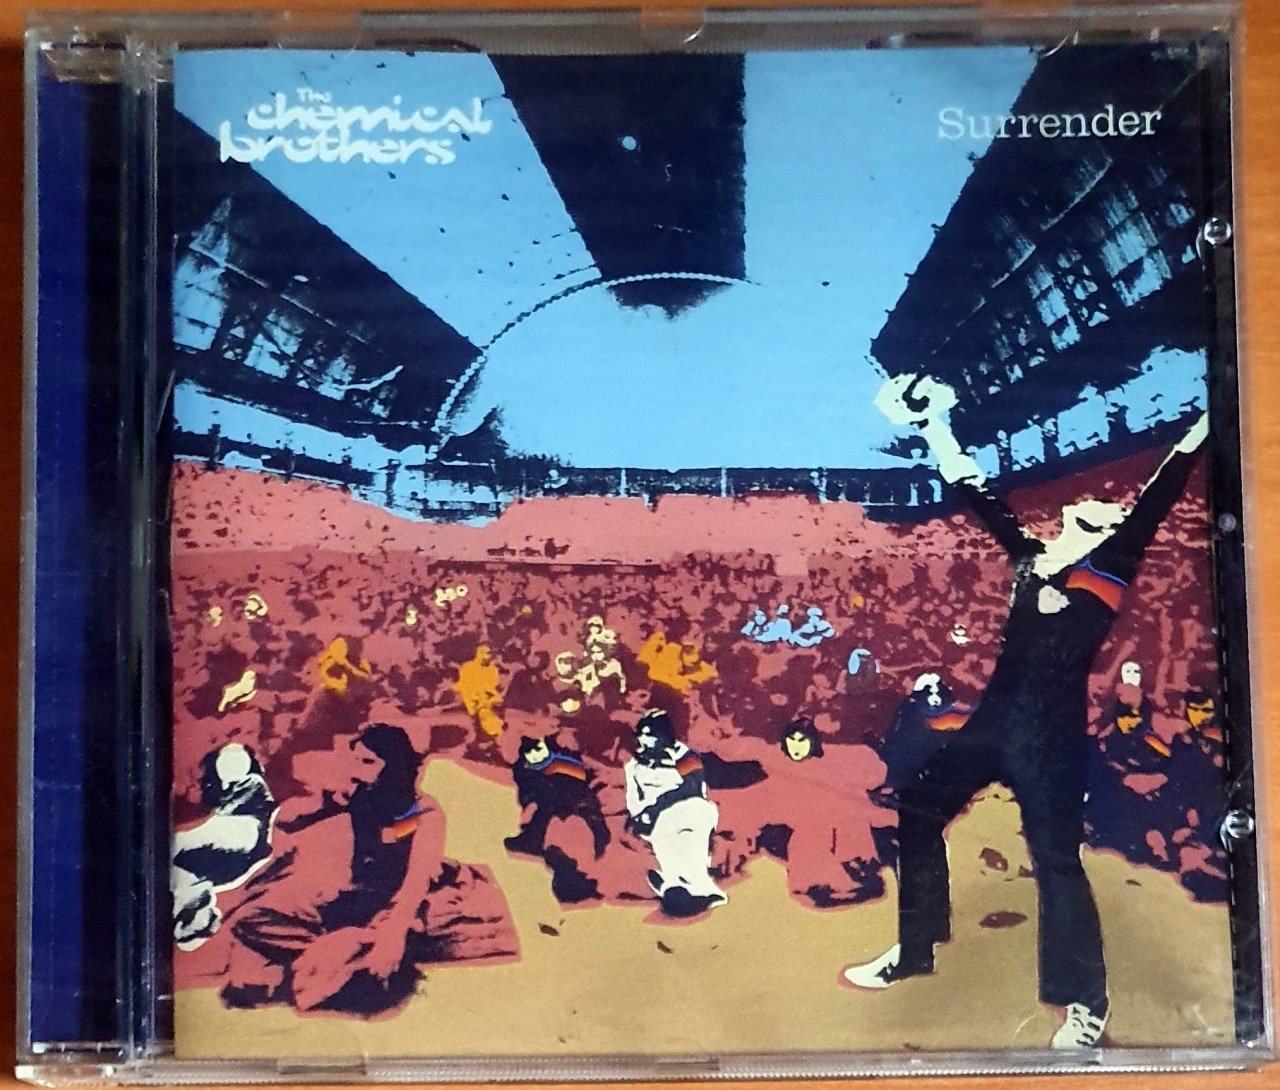 THE CHEMICAL BROTHERS - SURRENDER (1999) - CD 2.EL